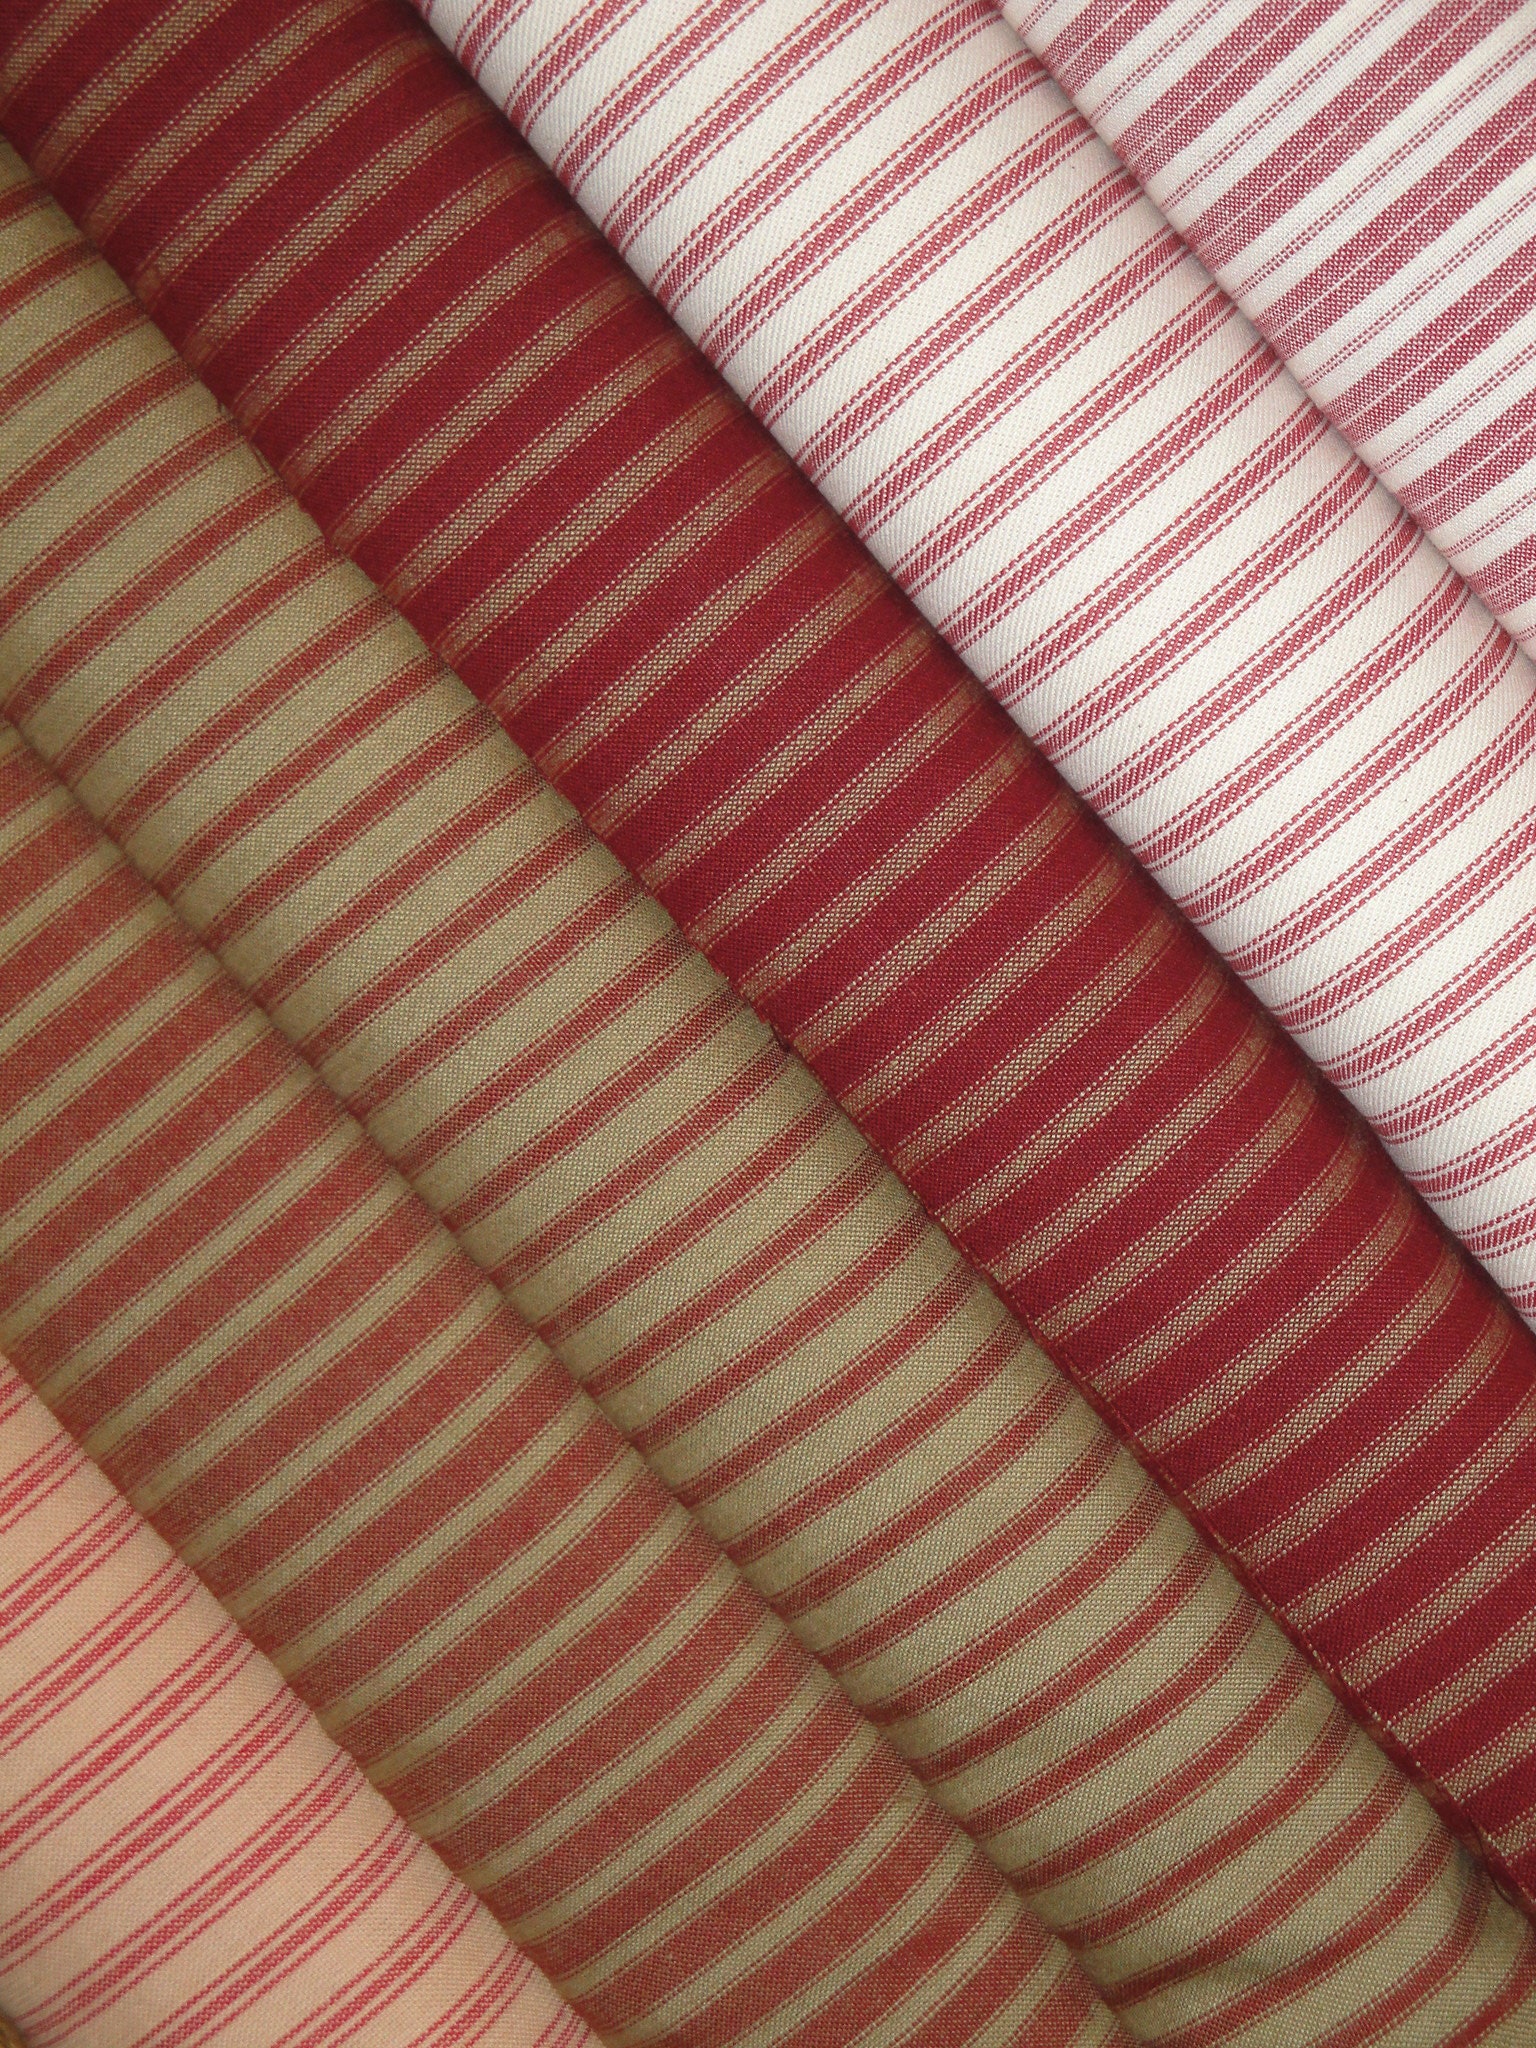 54 Red Stripe Ticking Fabric - Per Yard [RED-TICK] - $5.49 :  , Burlap for Wedding and Special Events